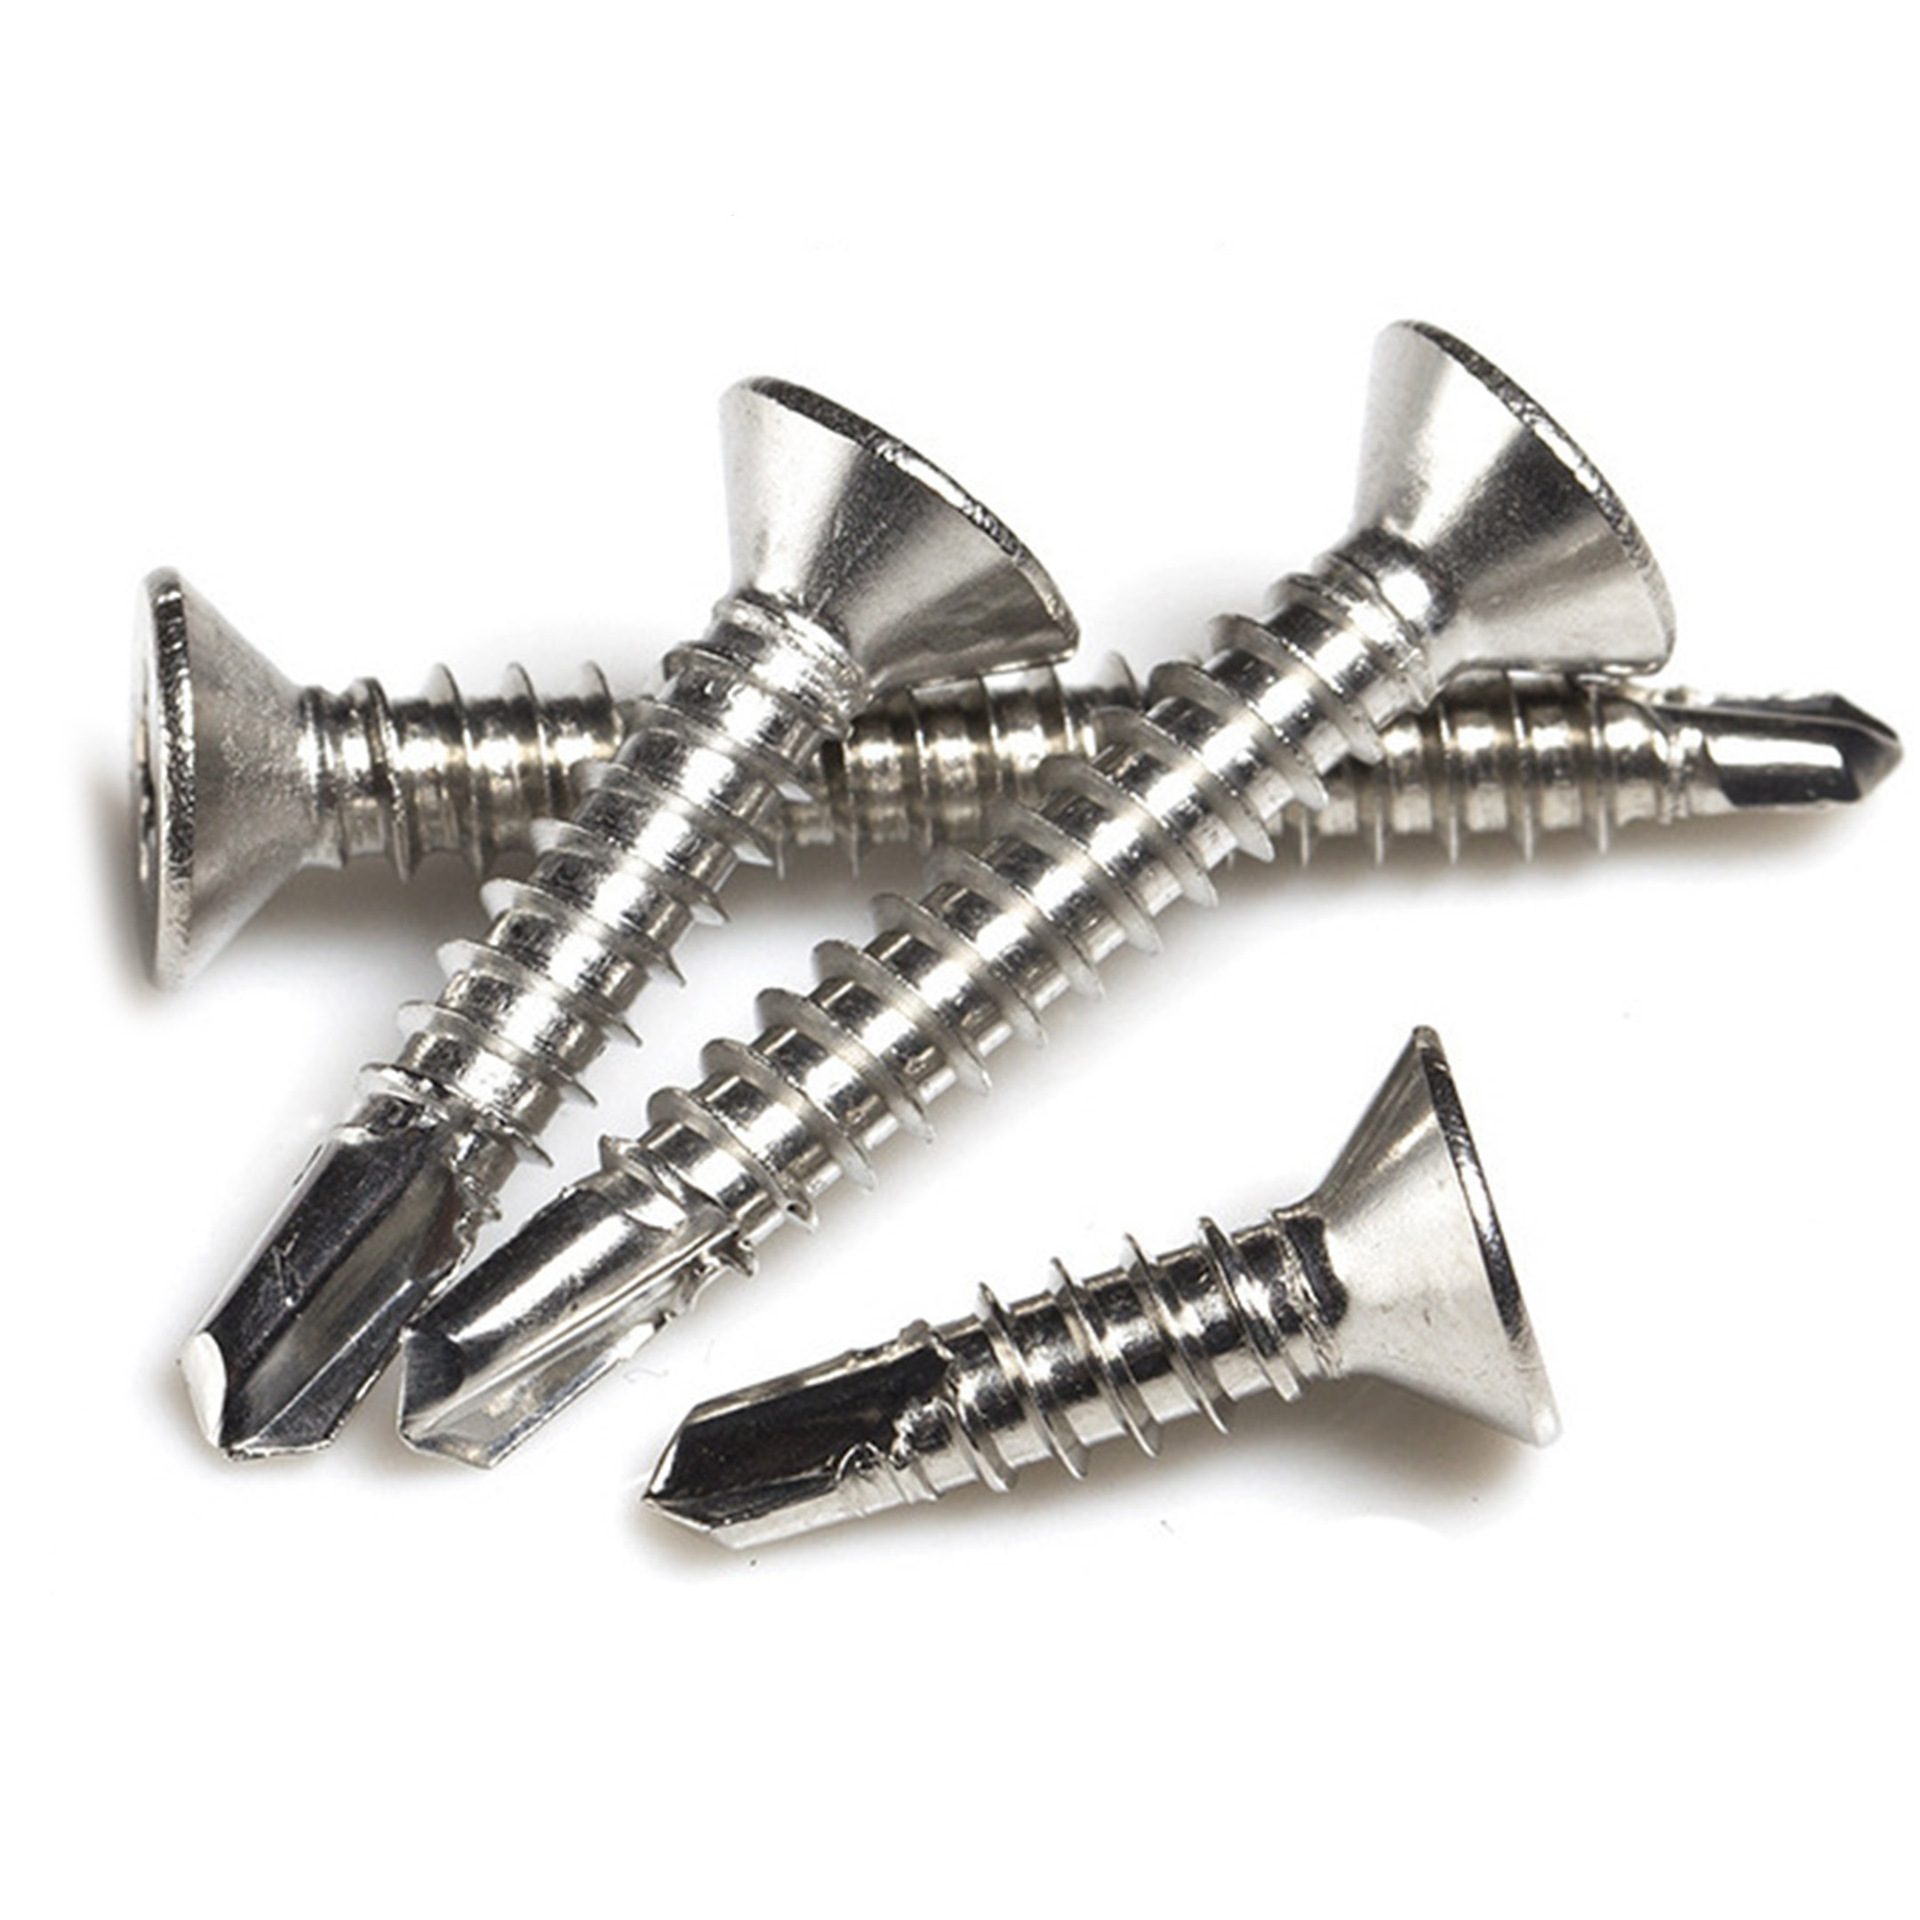 M4.2 304 Stainless Steel Phillips Flat Head Drilling Self-Tapping Screws